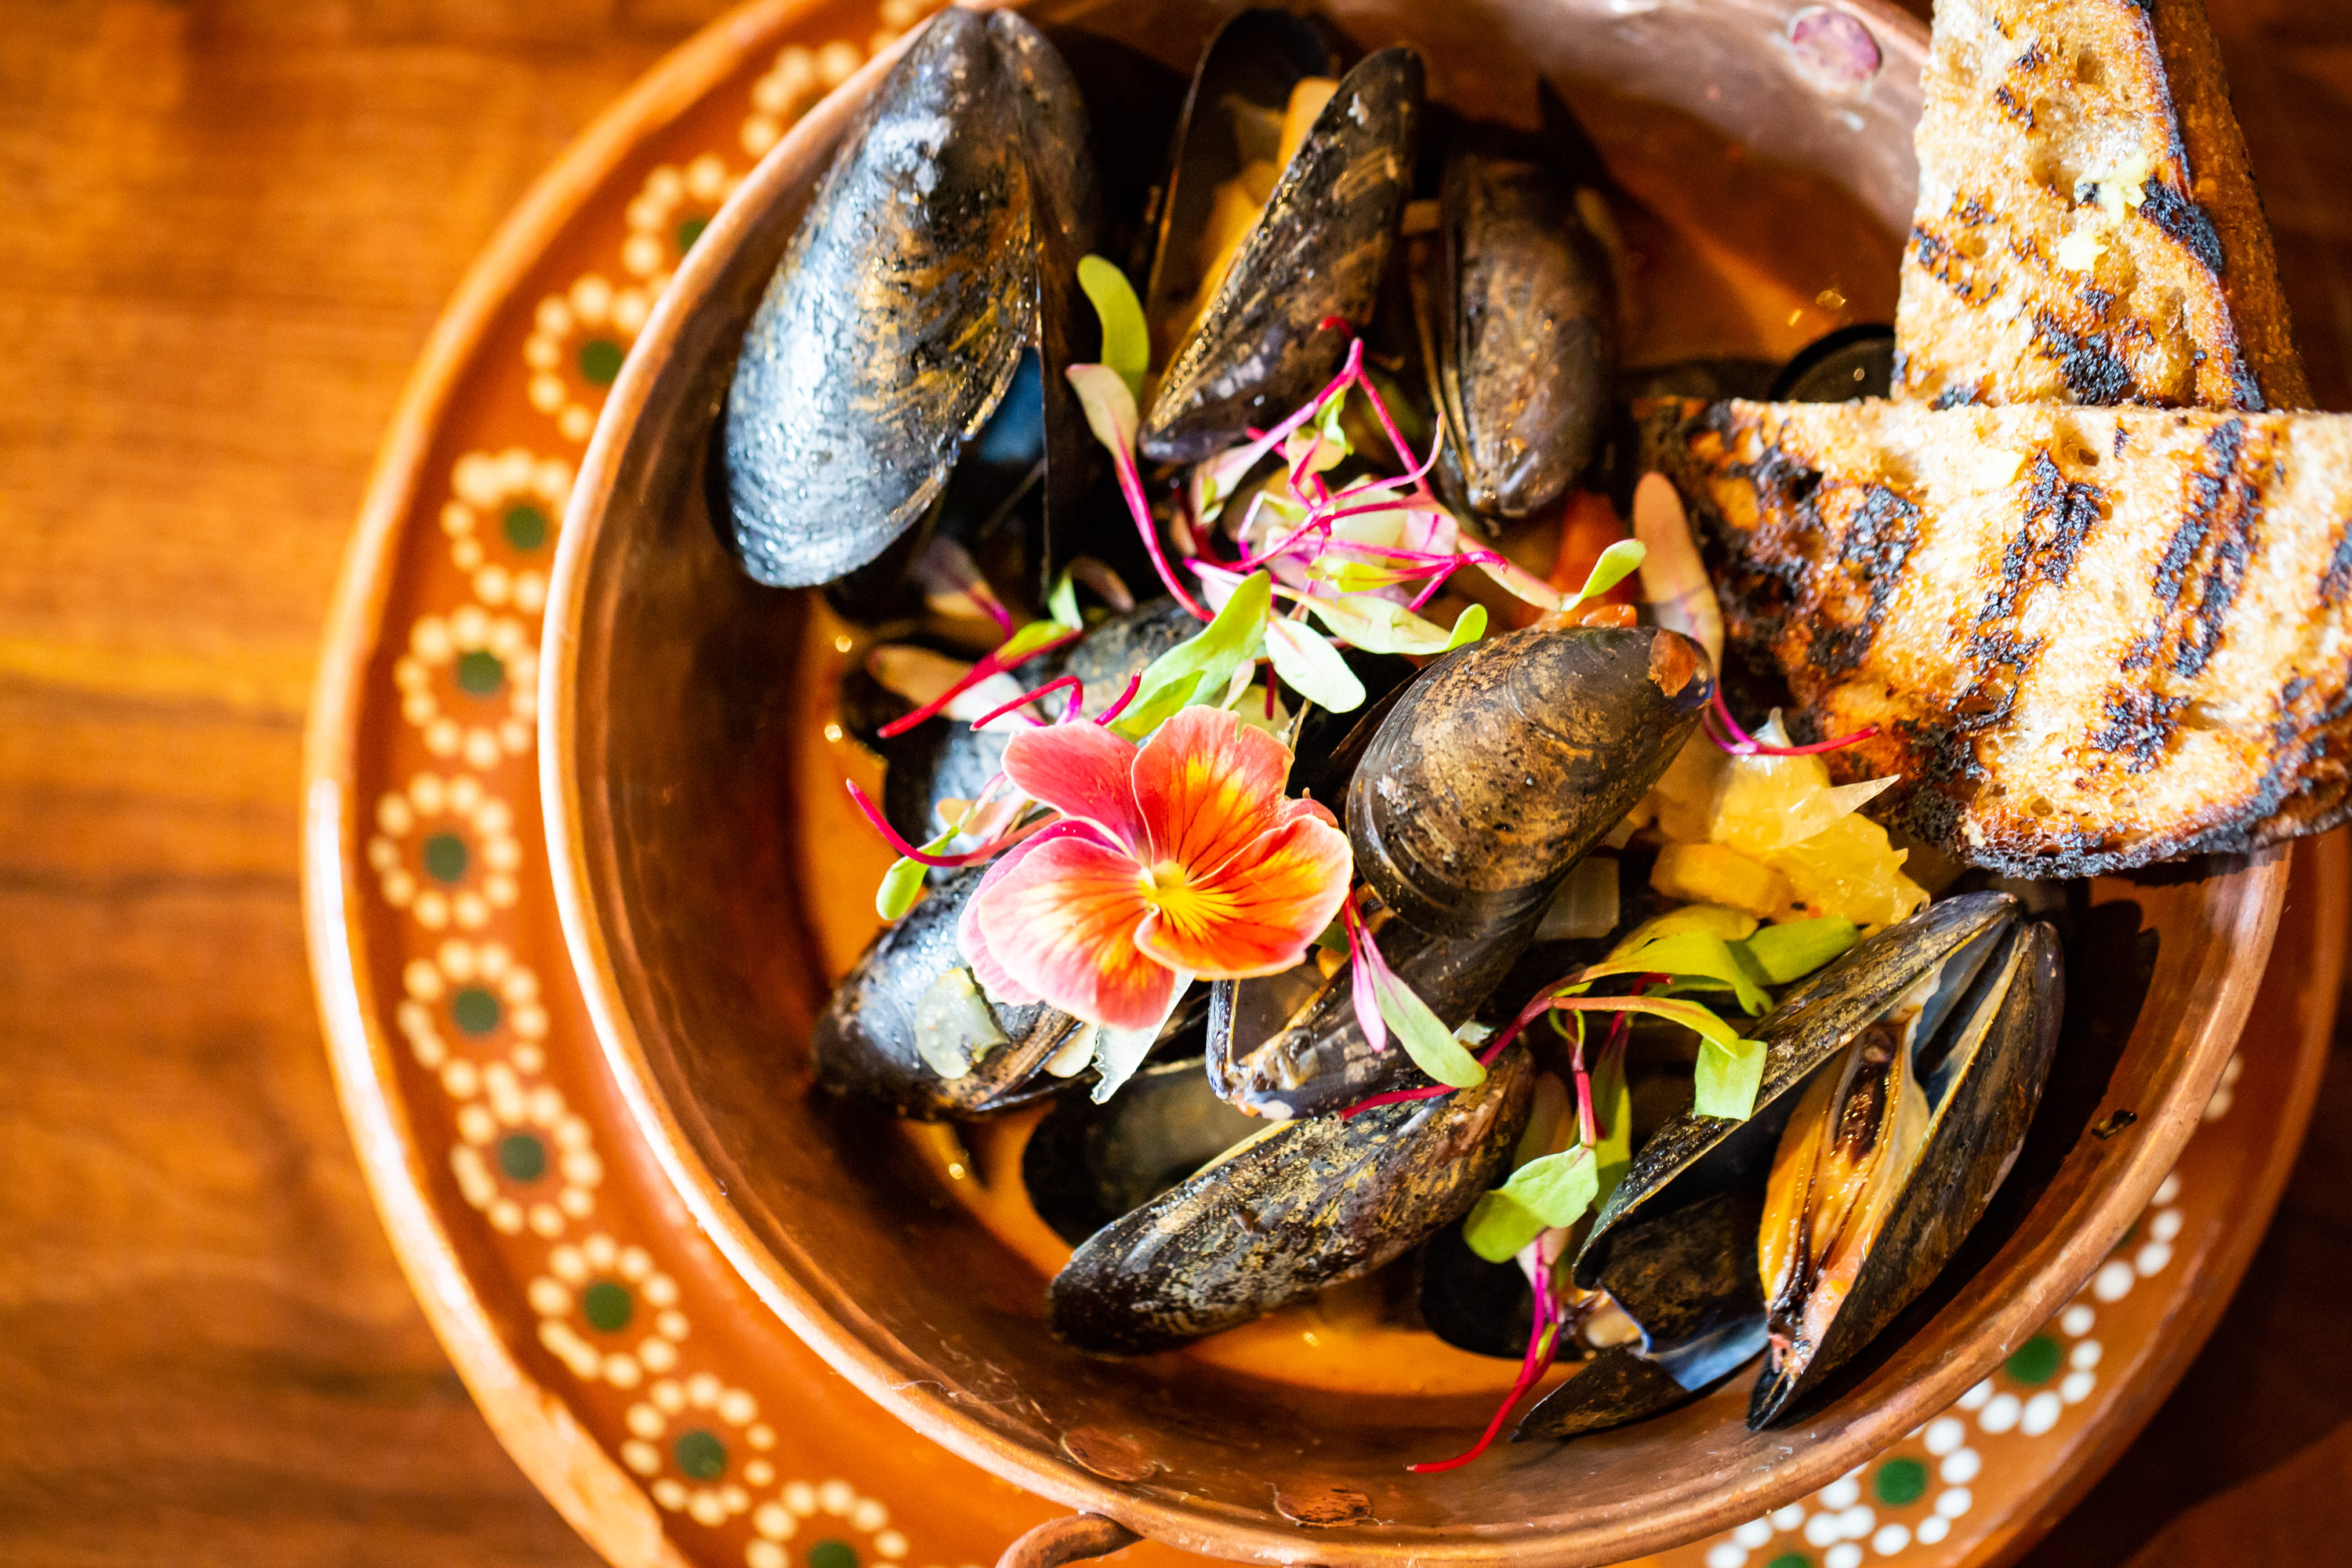 Mejillones or mussels in tomato broth with butter beer and limon confit from Tortuga y Chango in Decatur, GA.